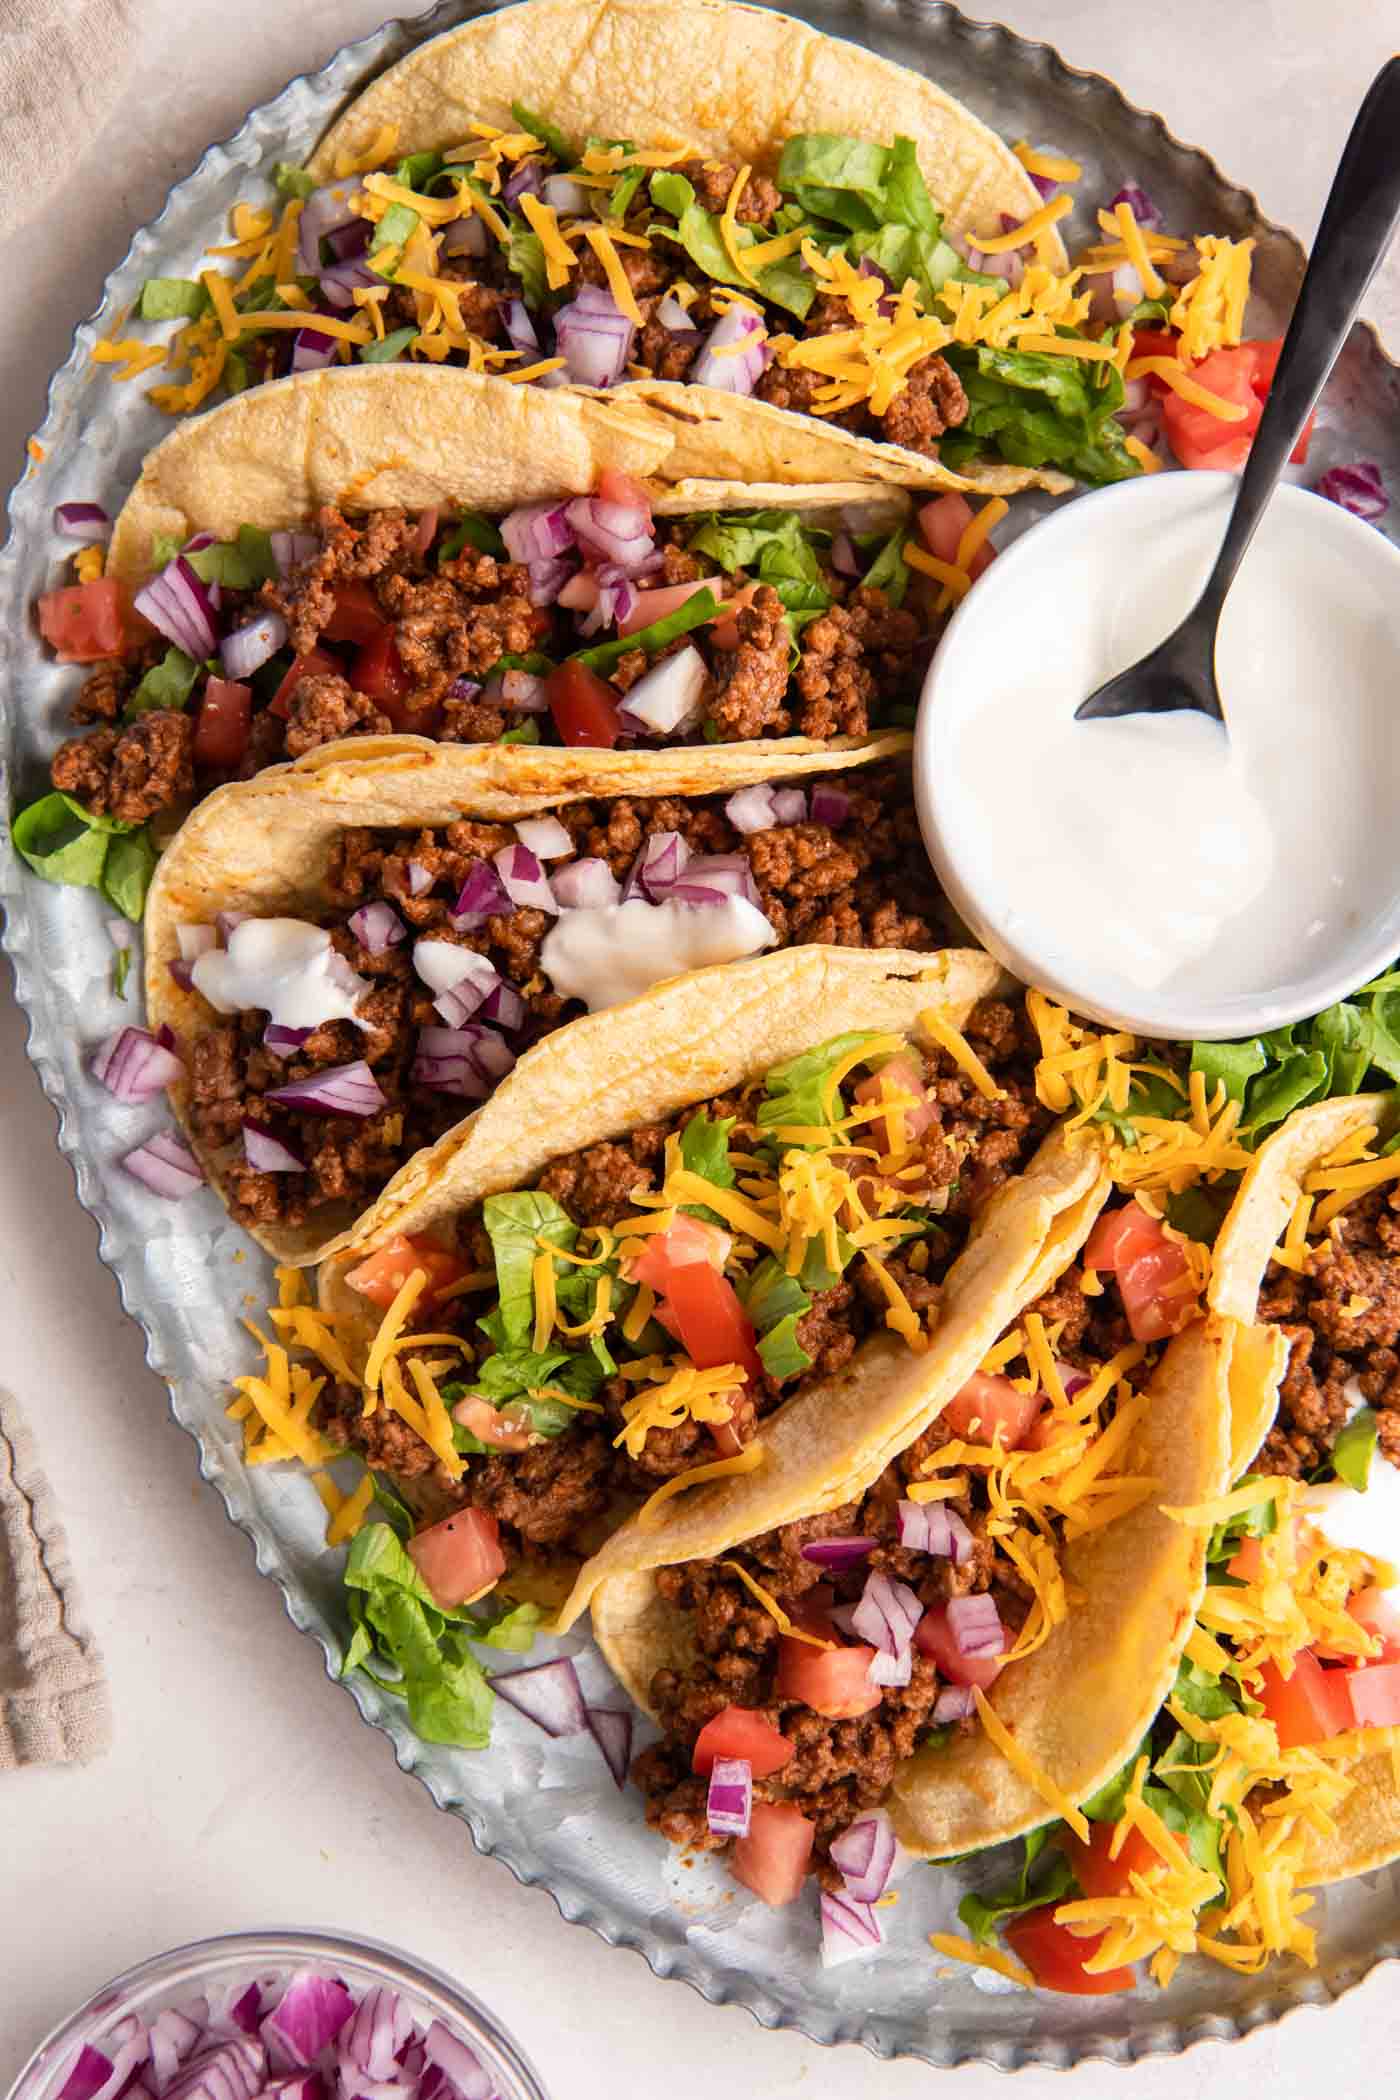 Ground beef taco meat served in corn tortillas with a variety of toppings.